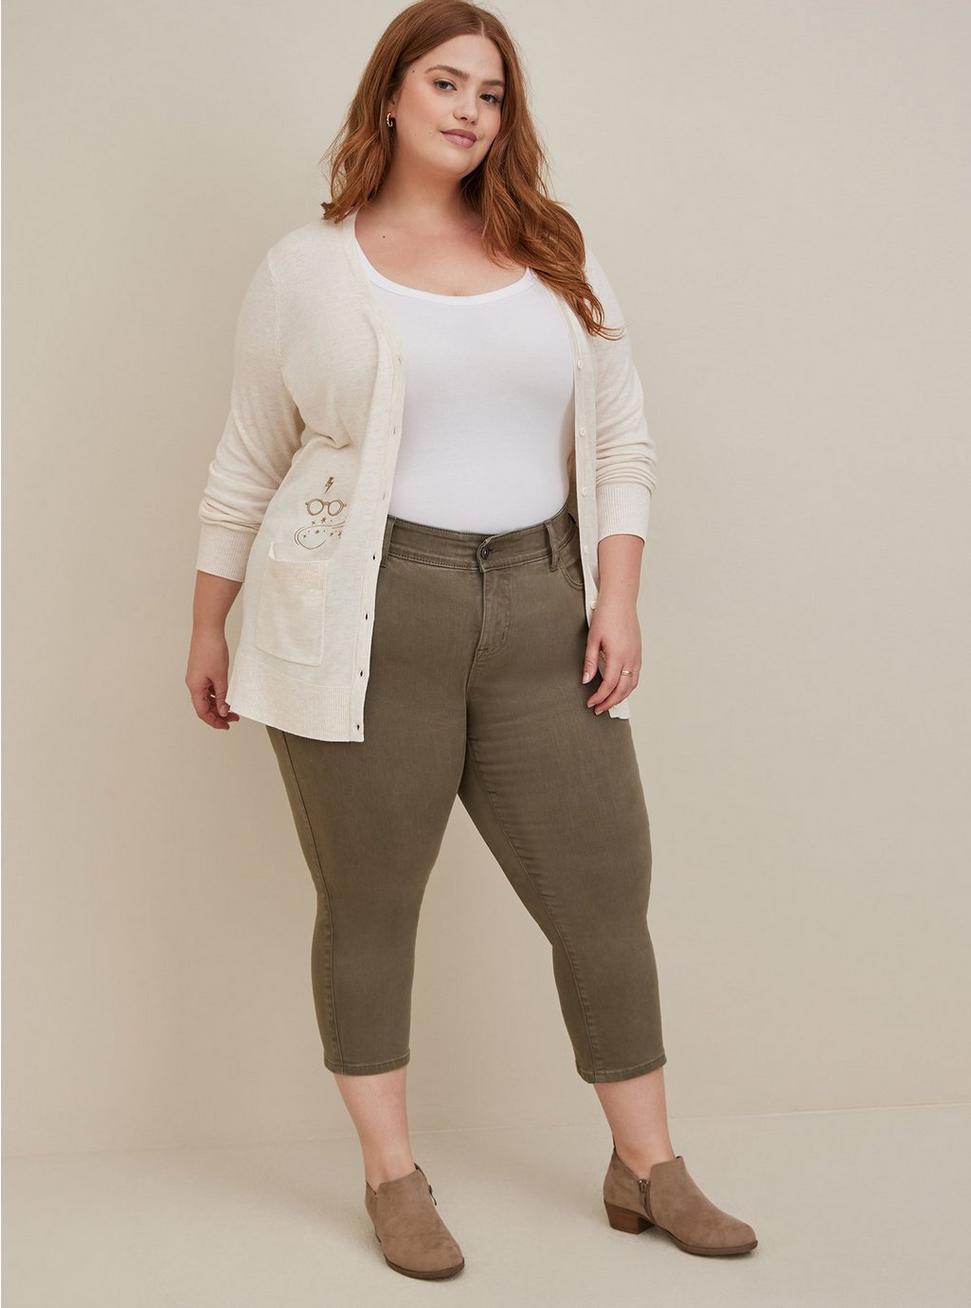 Harry Potter Button Front Cardigan - Heather Oatmeal, IVORY, alternate